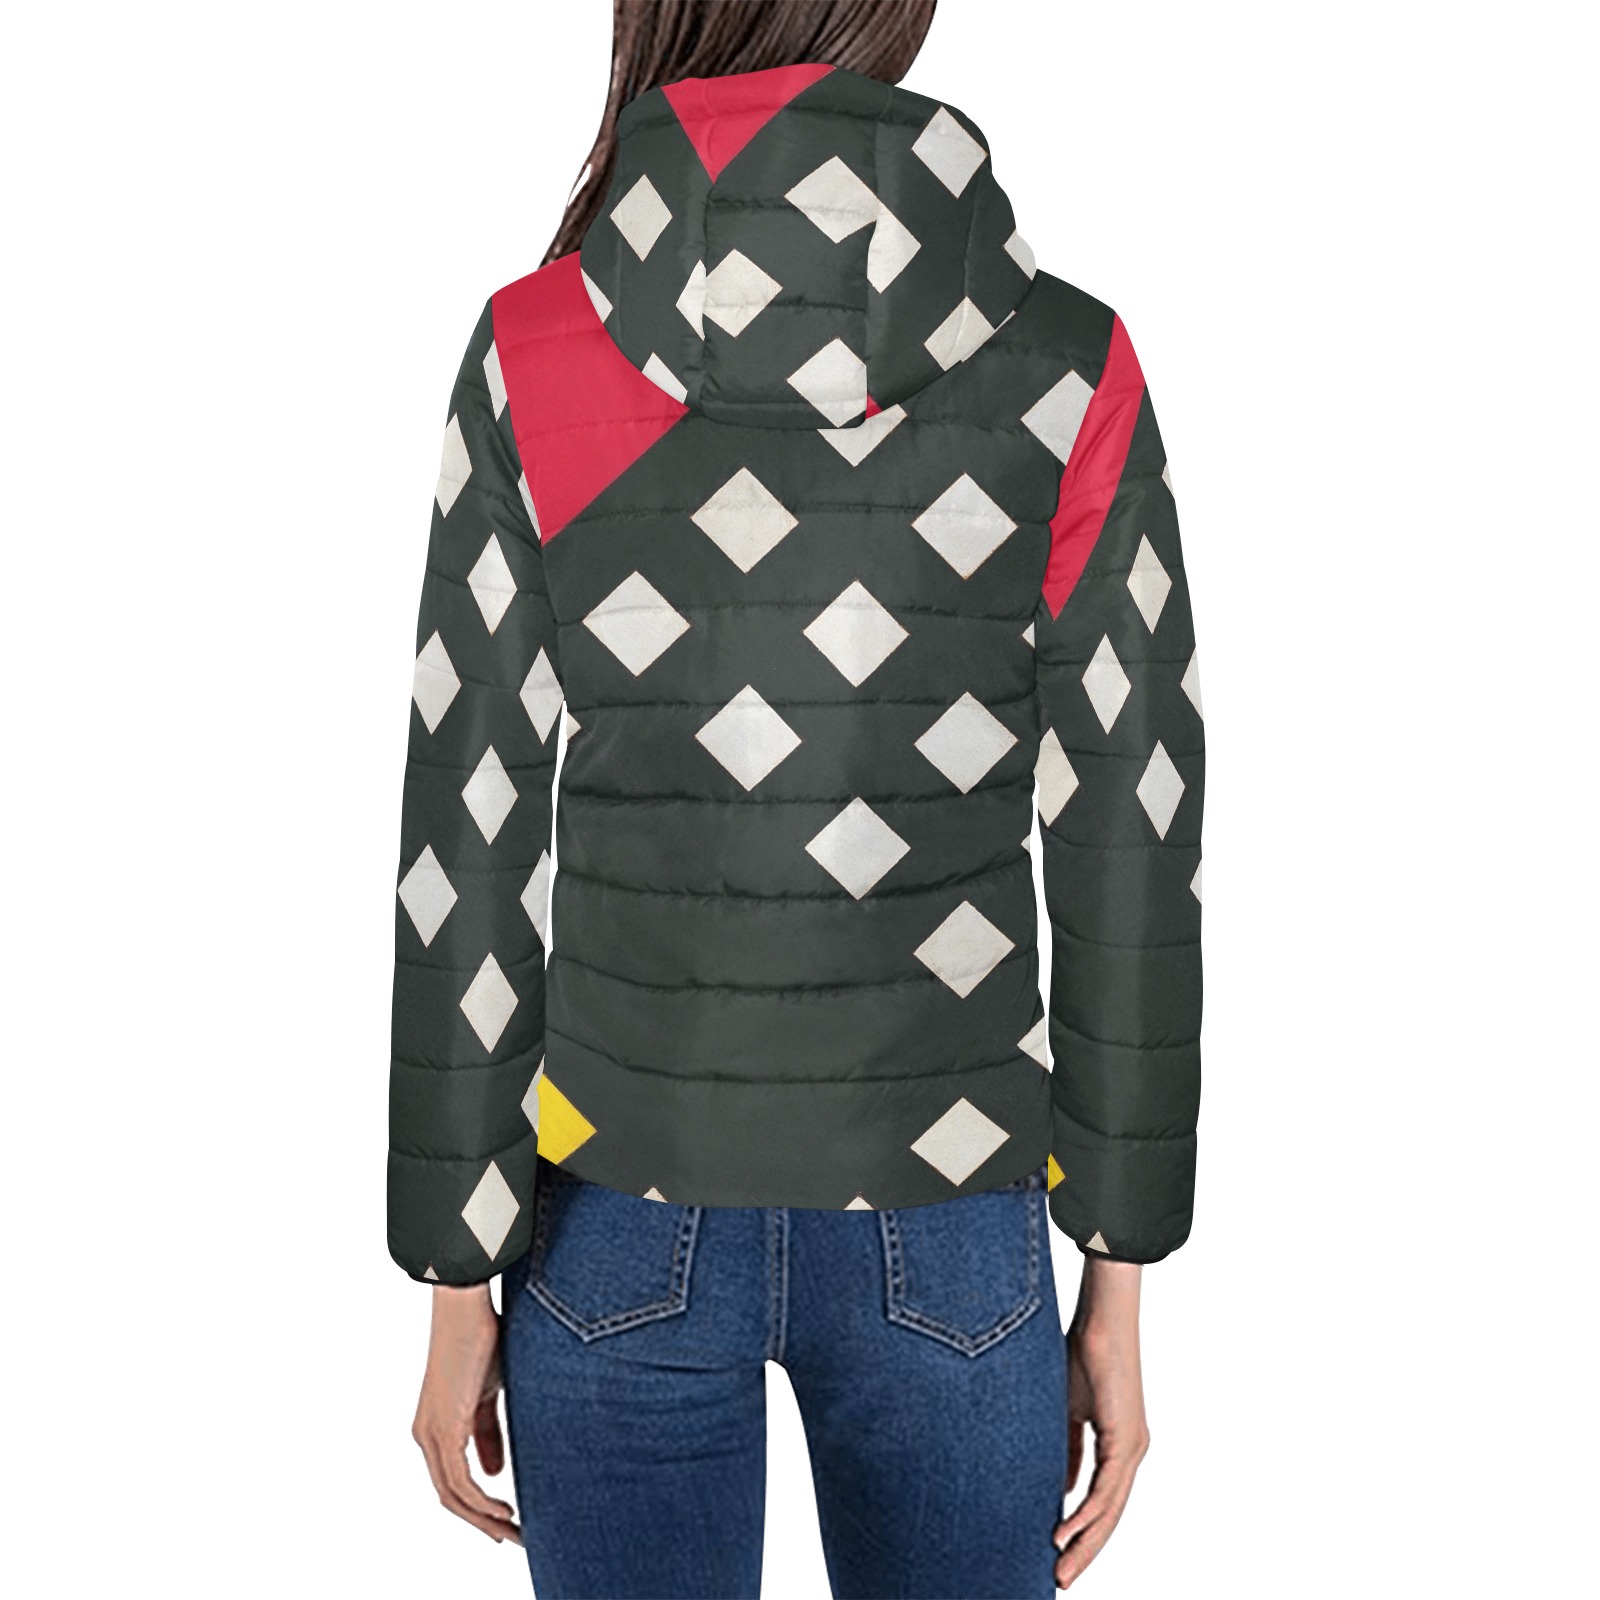 Counter-composition XV by Theo van Doesburg- Women's Padded Hooded Jacket (Model H46)